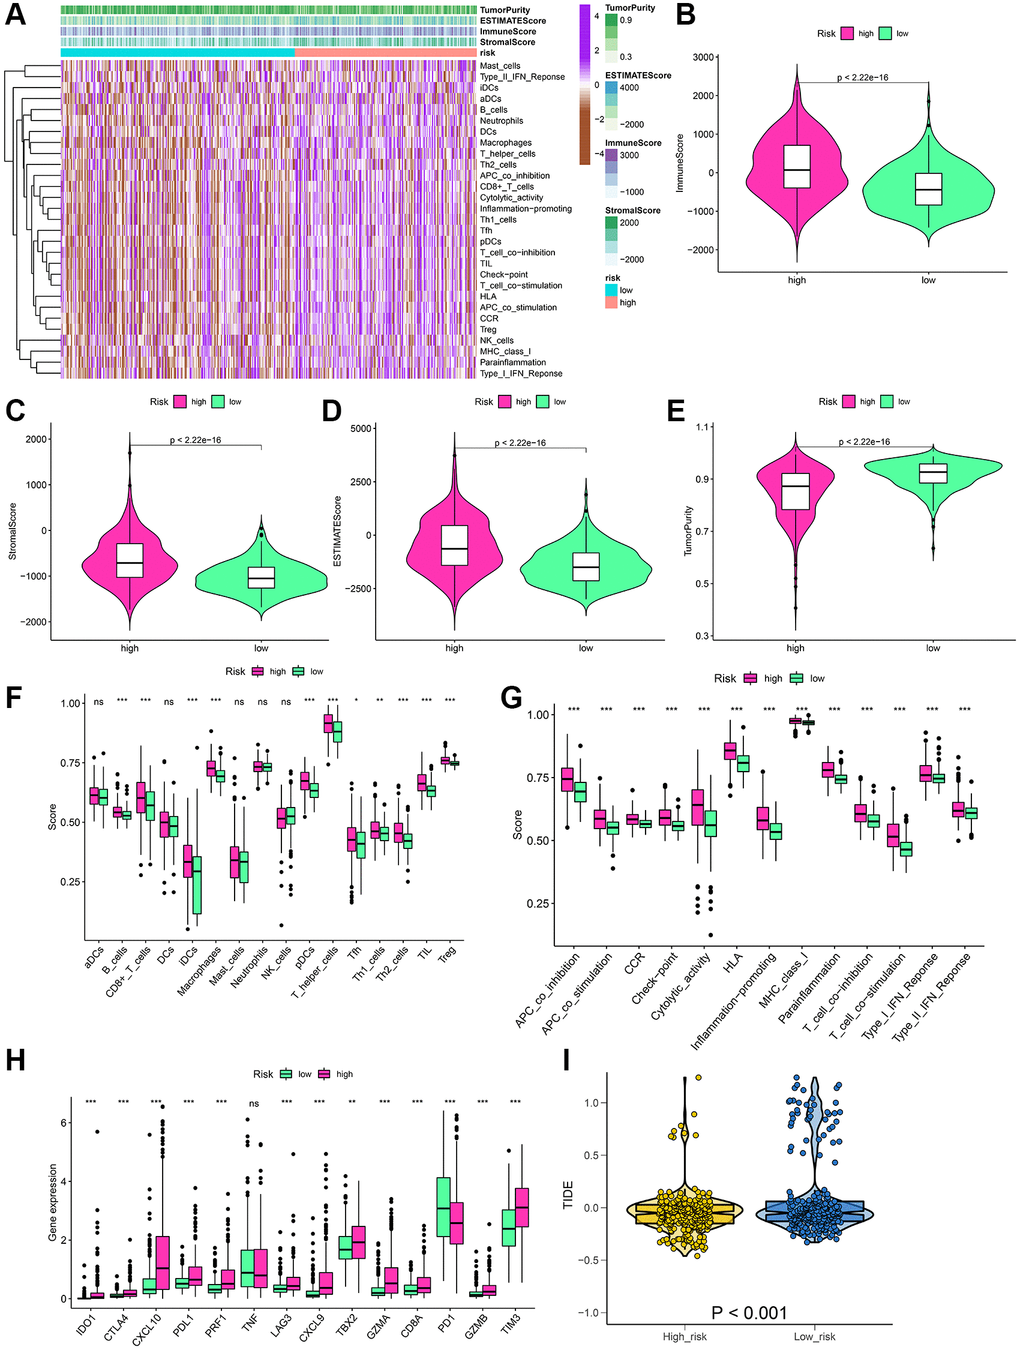 Estimation of the immune status and response to immunotherapy based on the signature in the high-risk and low-risk groups for the whole set. (A) Heatmap of the immune scores, stromal scores, tumor purity, ESTIMATE scores and immune-infiltrating cells in the two groups. (B–E) Violin plots for the immune scores, stromal scores, ESTIMATE scores, and tumor purity. (F–H) Boxplots of immune cells scores, immune-related functions scores and immune checkpoints expression. (I) Prediction of immunotherapy response according to TIDE score. *P **P ***P 